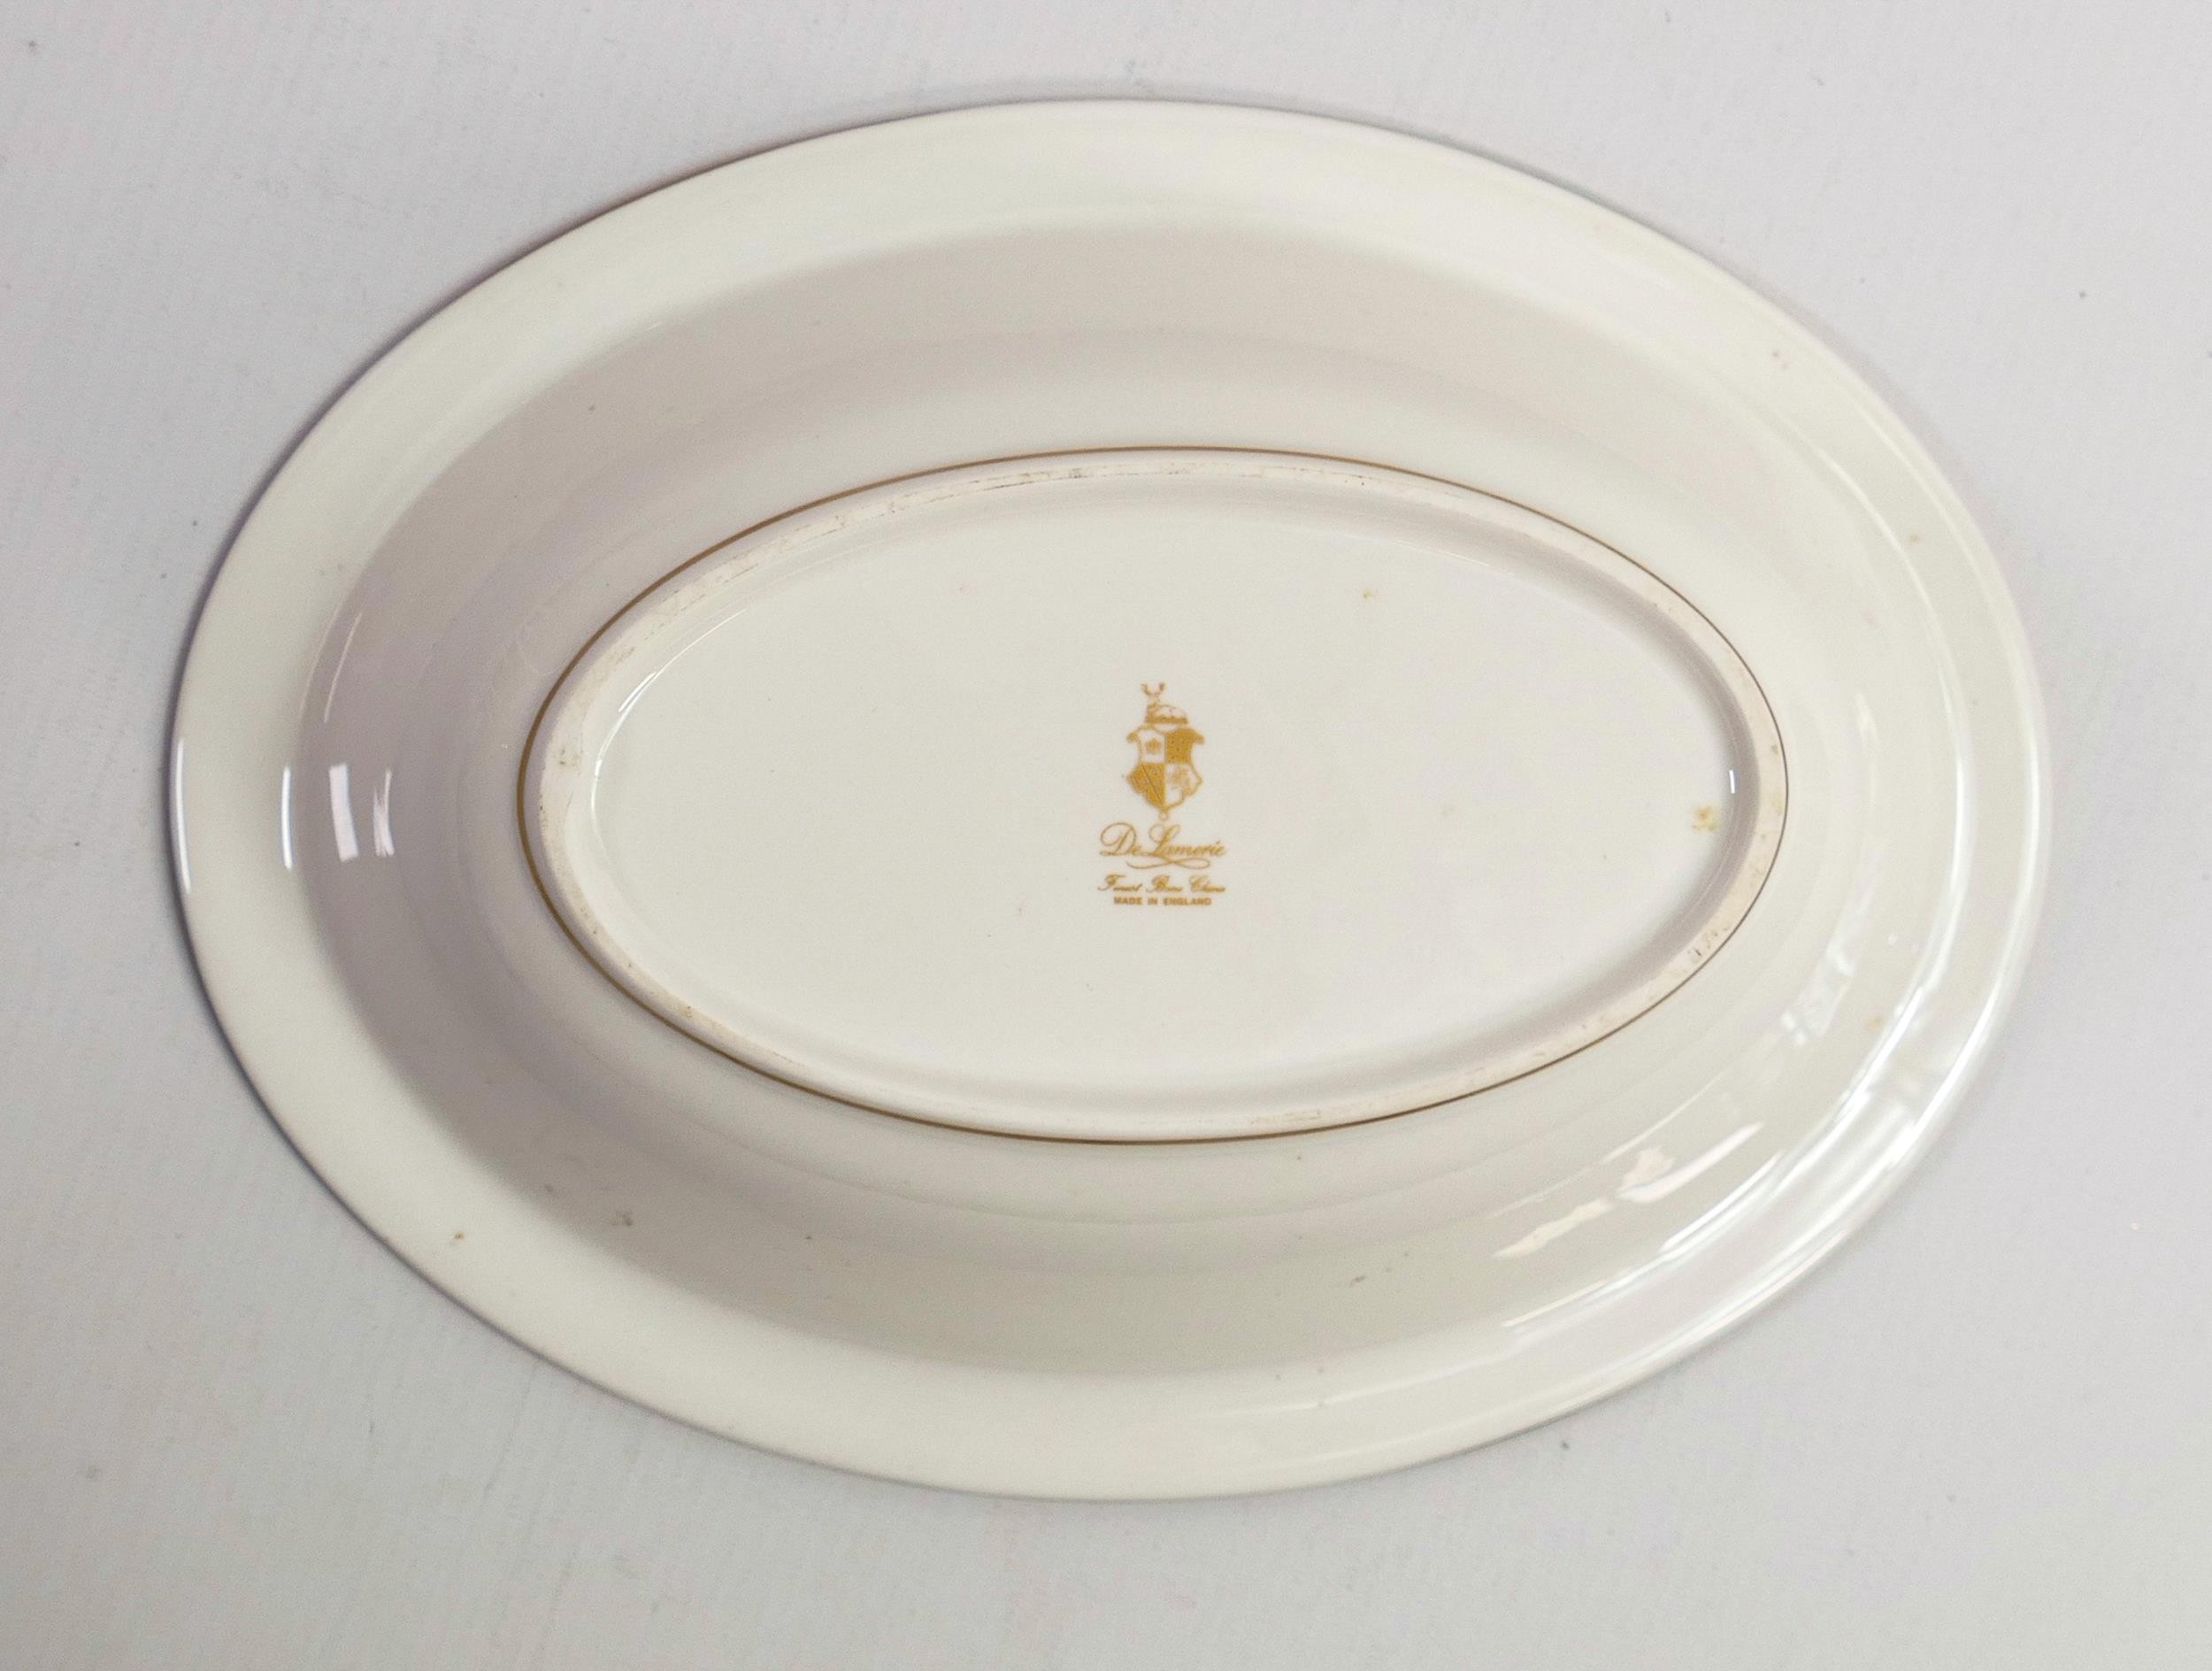 De Lamerie Fine Bone China Chatsworth Garland patterned oval open vegetable dish, specially made - Image 2 of 3